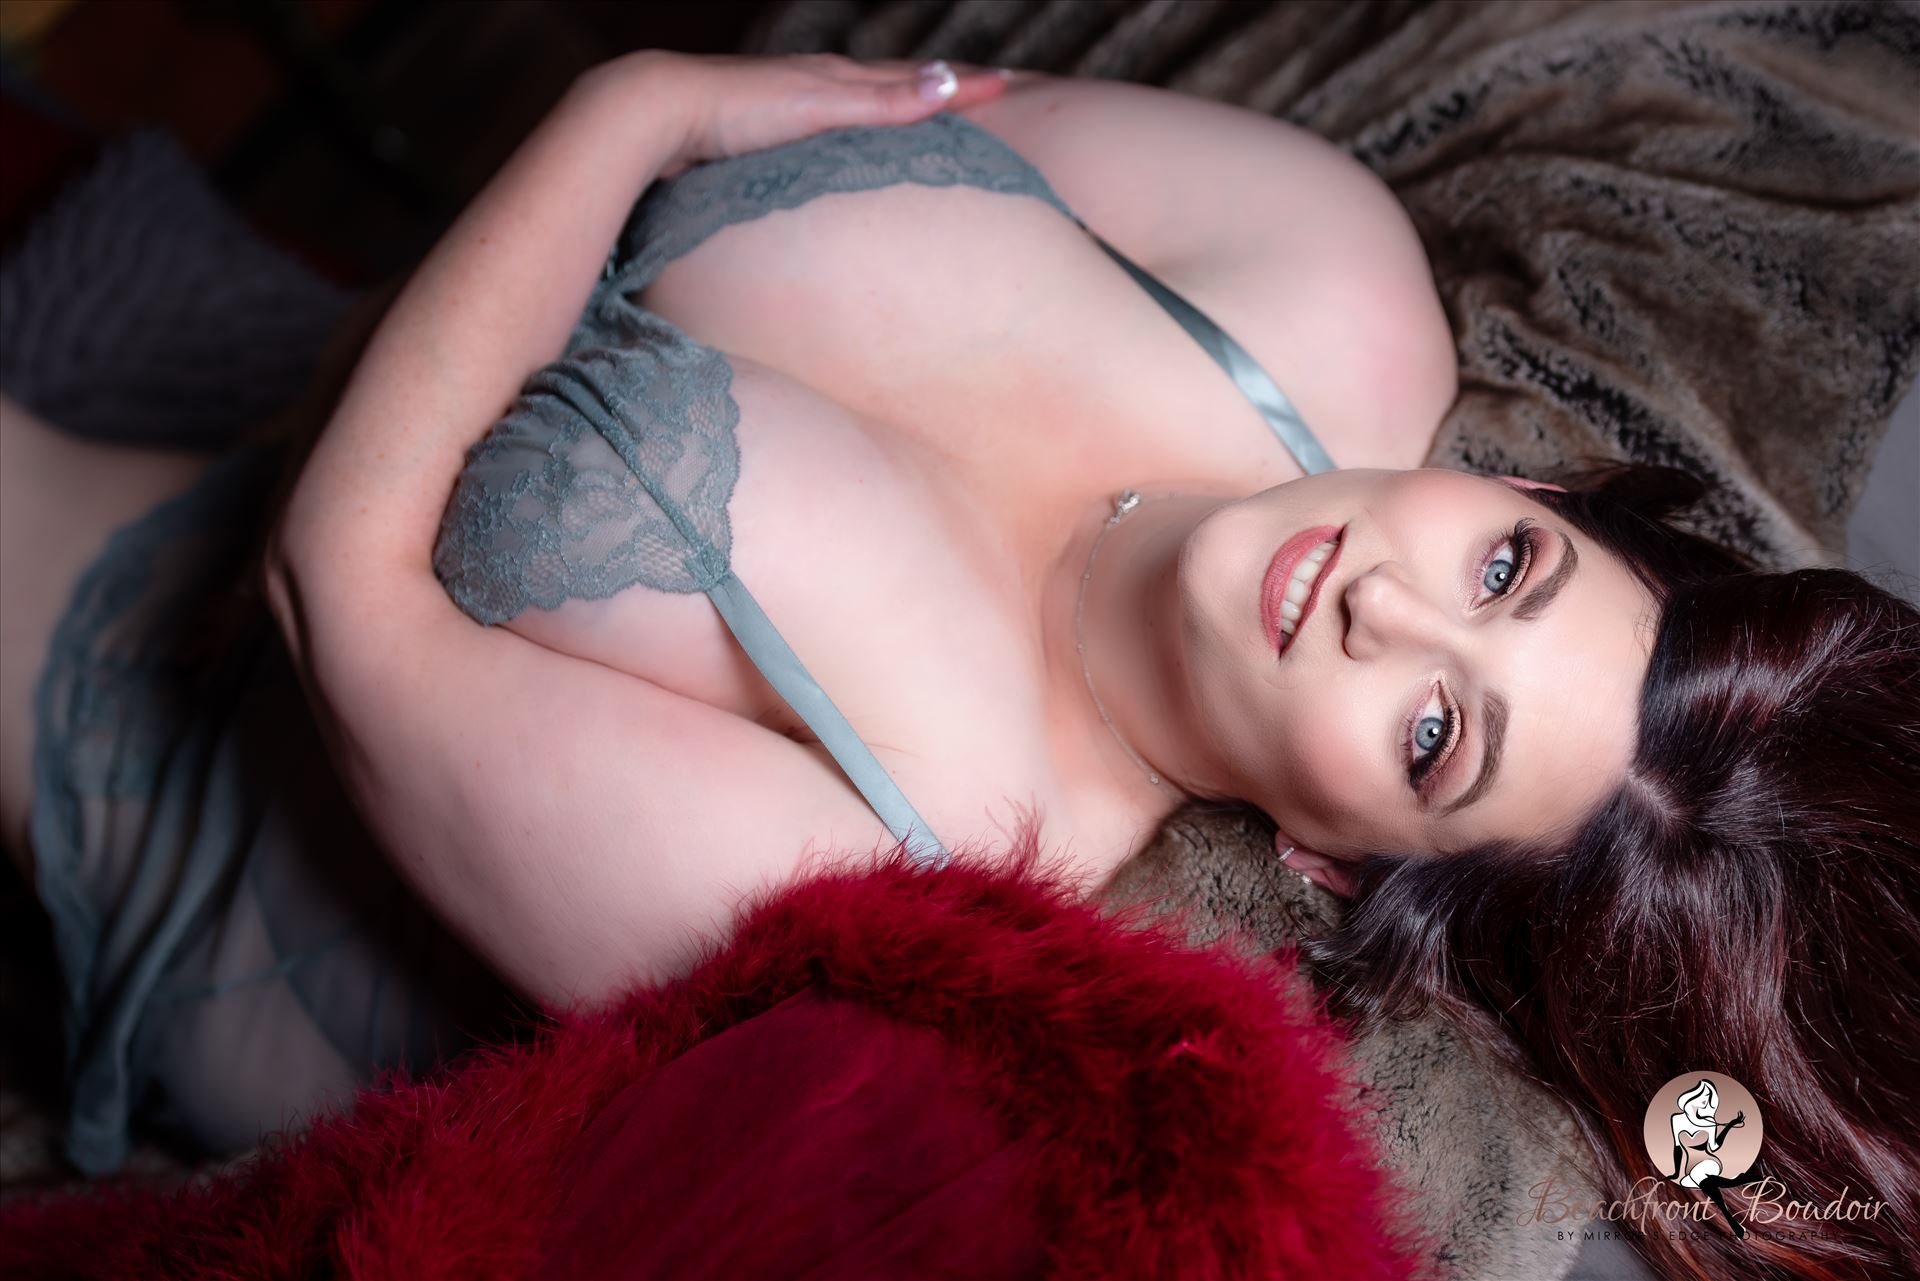 Port-.JPGBeachfront Boudoir by Mirror's Edge Photography is a Boutique Luxury Boudoir Photography Studio located just blocks from the beach in Oceano, California. My mission is to show as many women as possible how beautiful they truly are! Curvy boudoir.